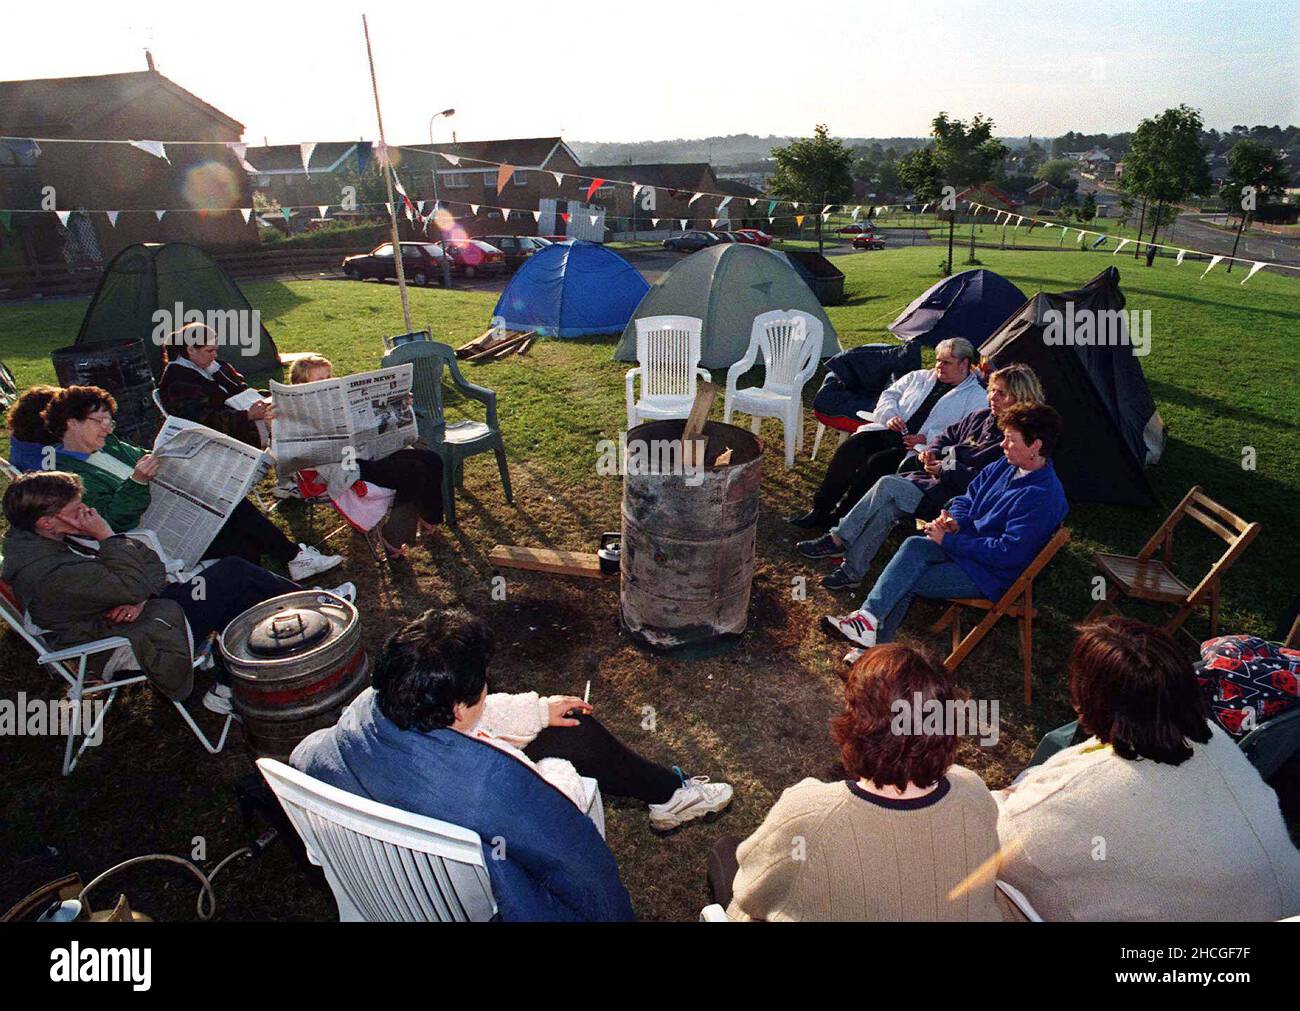 File photod ated 05/07/97 of a dawn vigil for Catholic residents of the Garvaghy Road in Portadown where they set up a peace camp to try and prevent an Orange March along the Road from Drumcree Church. An Irish Government official asked an NIO minister about speculation that the British Army was 'measuring' the Garvaghy Road in Portadown for bollards at the height of the marching dispute in 1997, according to newly released documents from the National Archives. Issue date: Wednesday December 29, 2021. Stock Photo